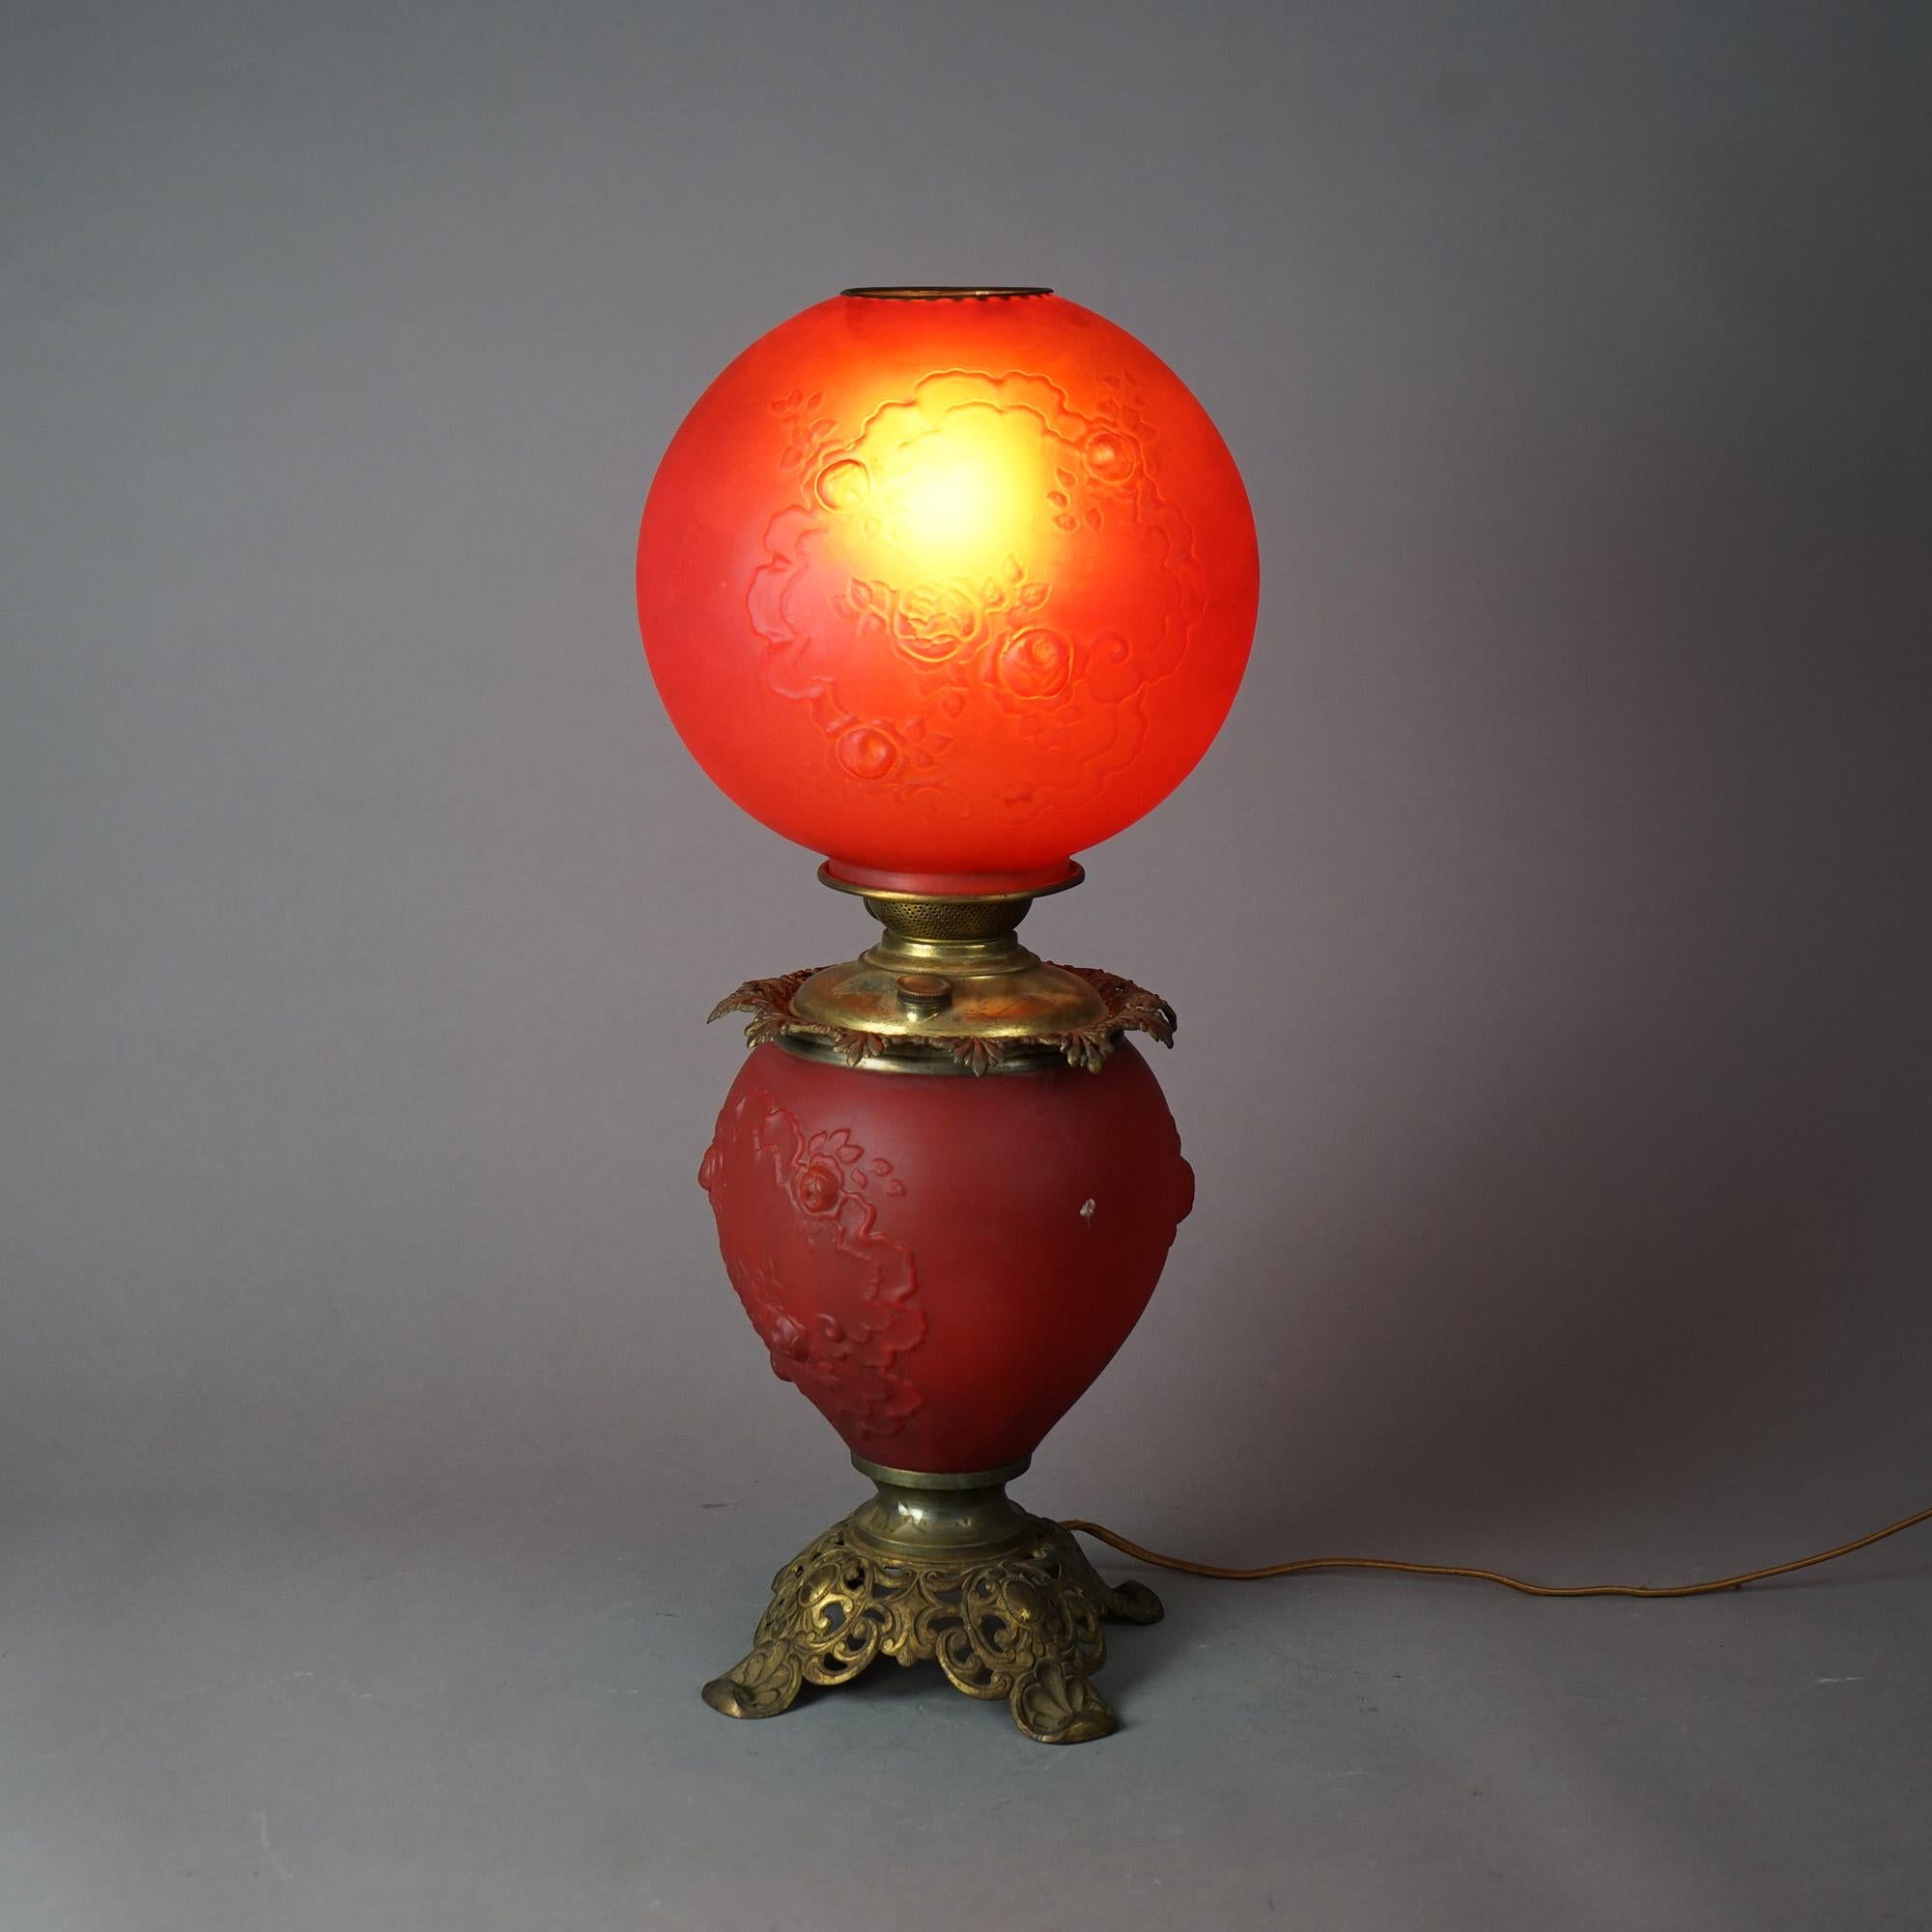 Antique Brass & Cranberry Glass Gone With The Wind Floral Embossed Lamp c1890 For Sale 4